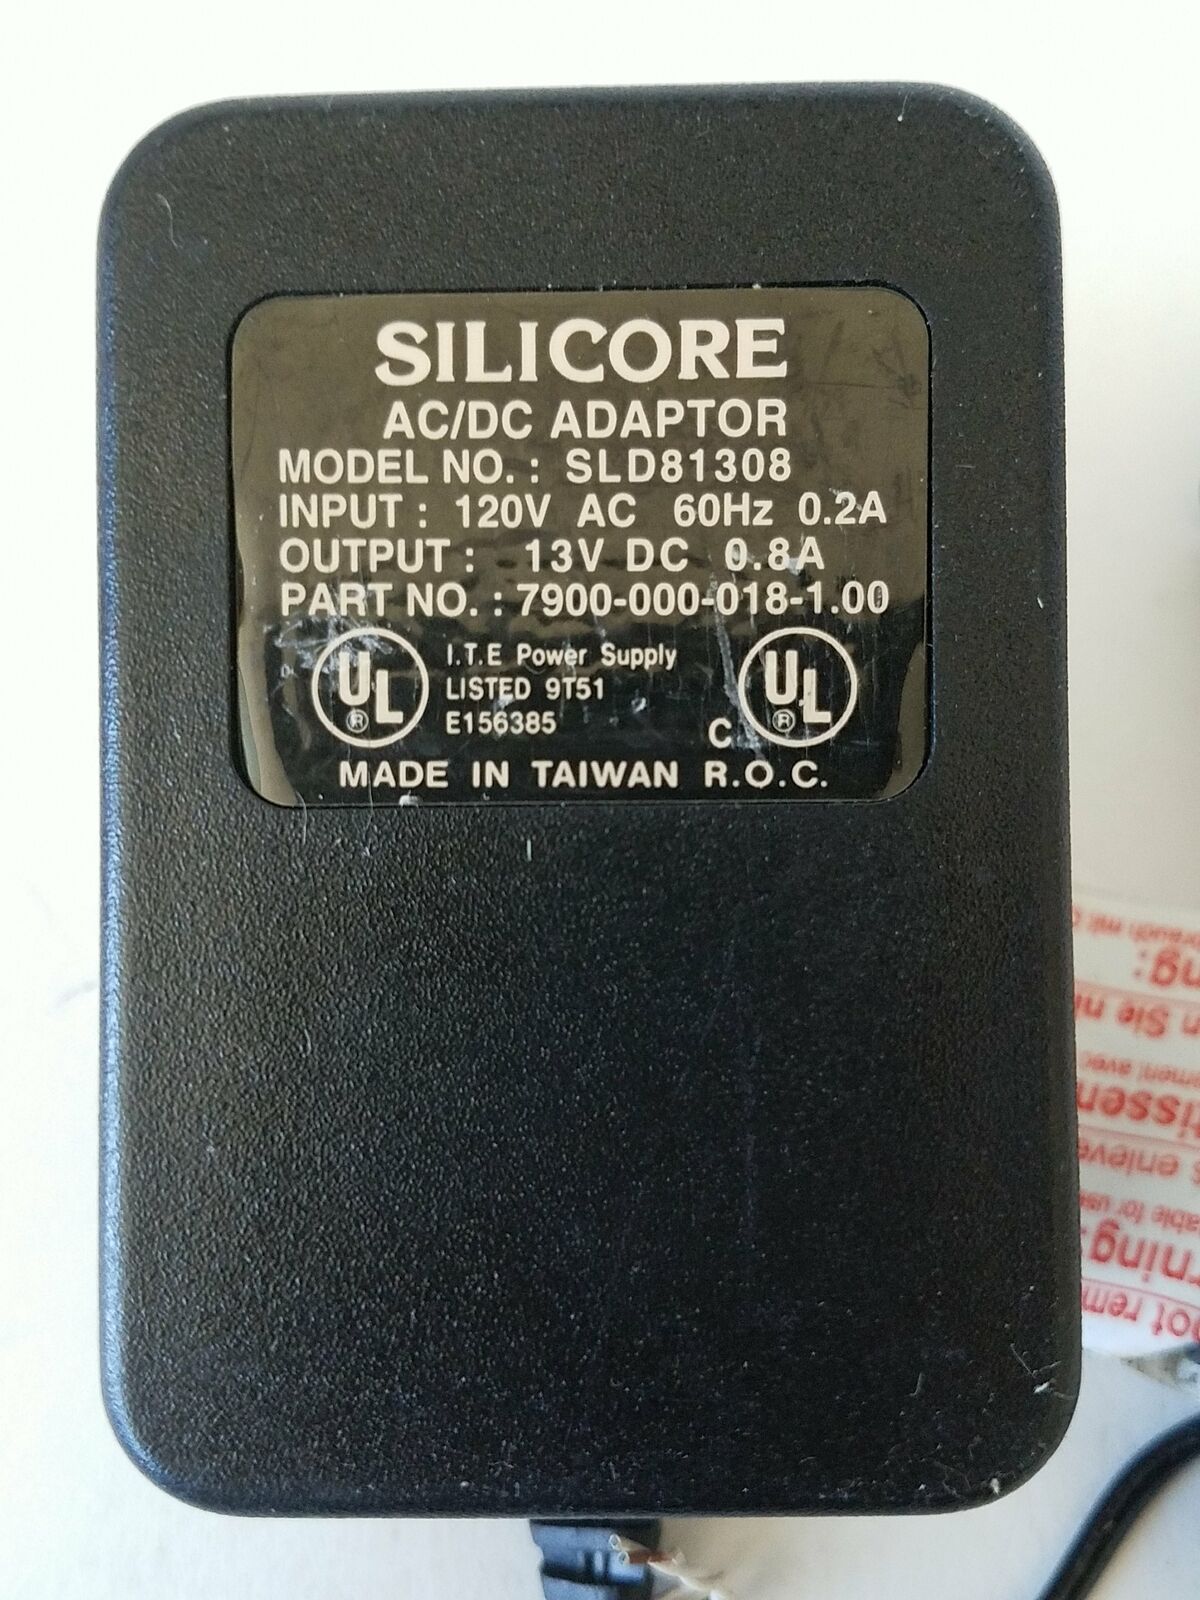 Silicore Sld81308 Ac Adapter Silicore Sld81308 13V Dc .8A